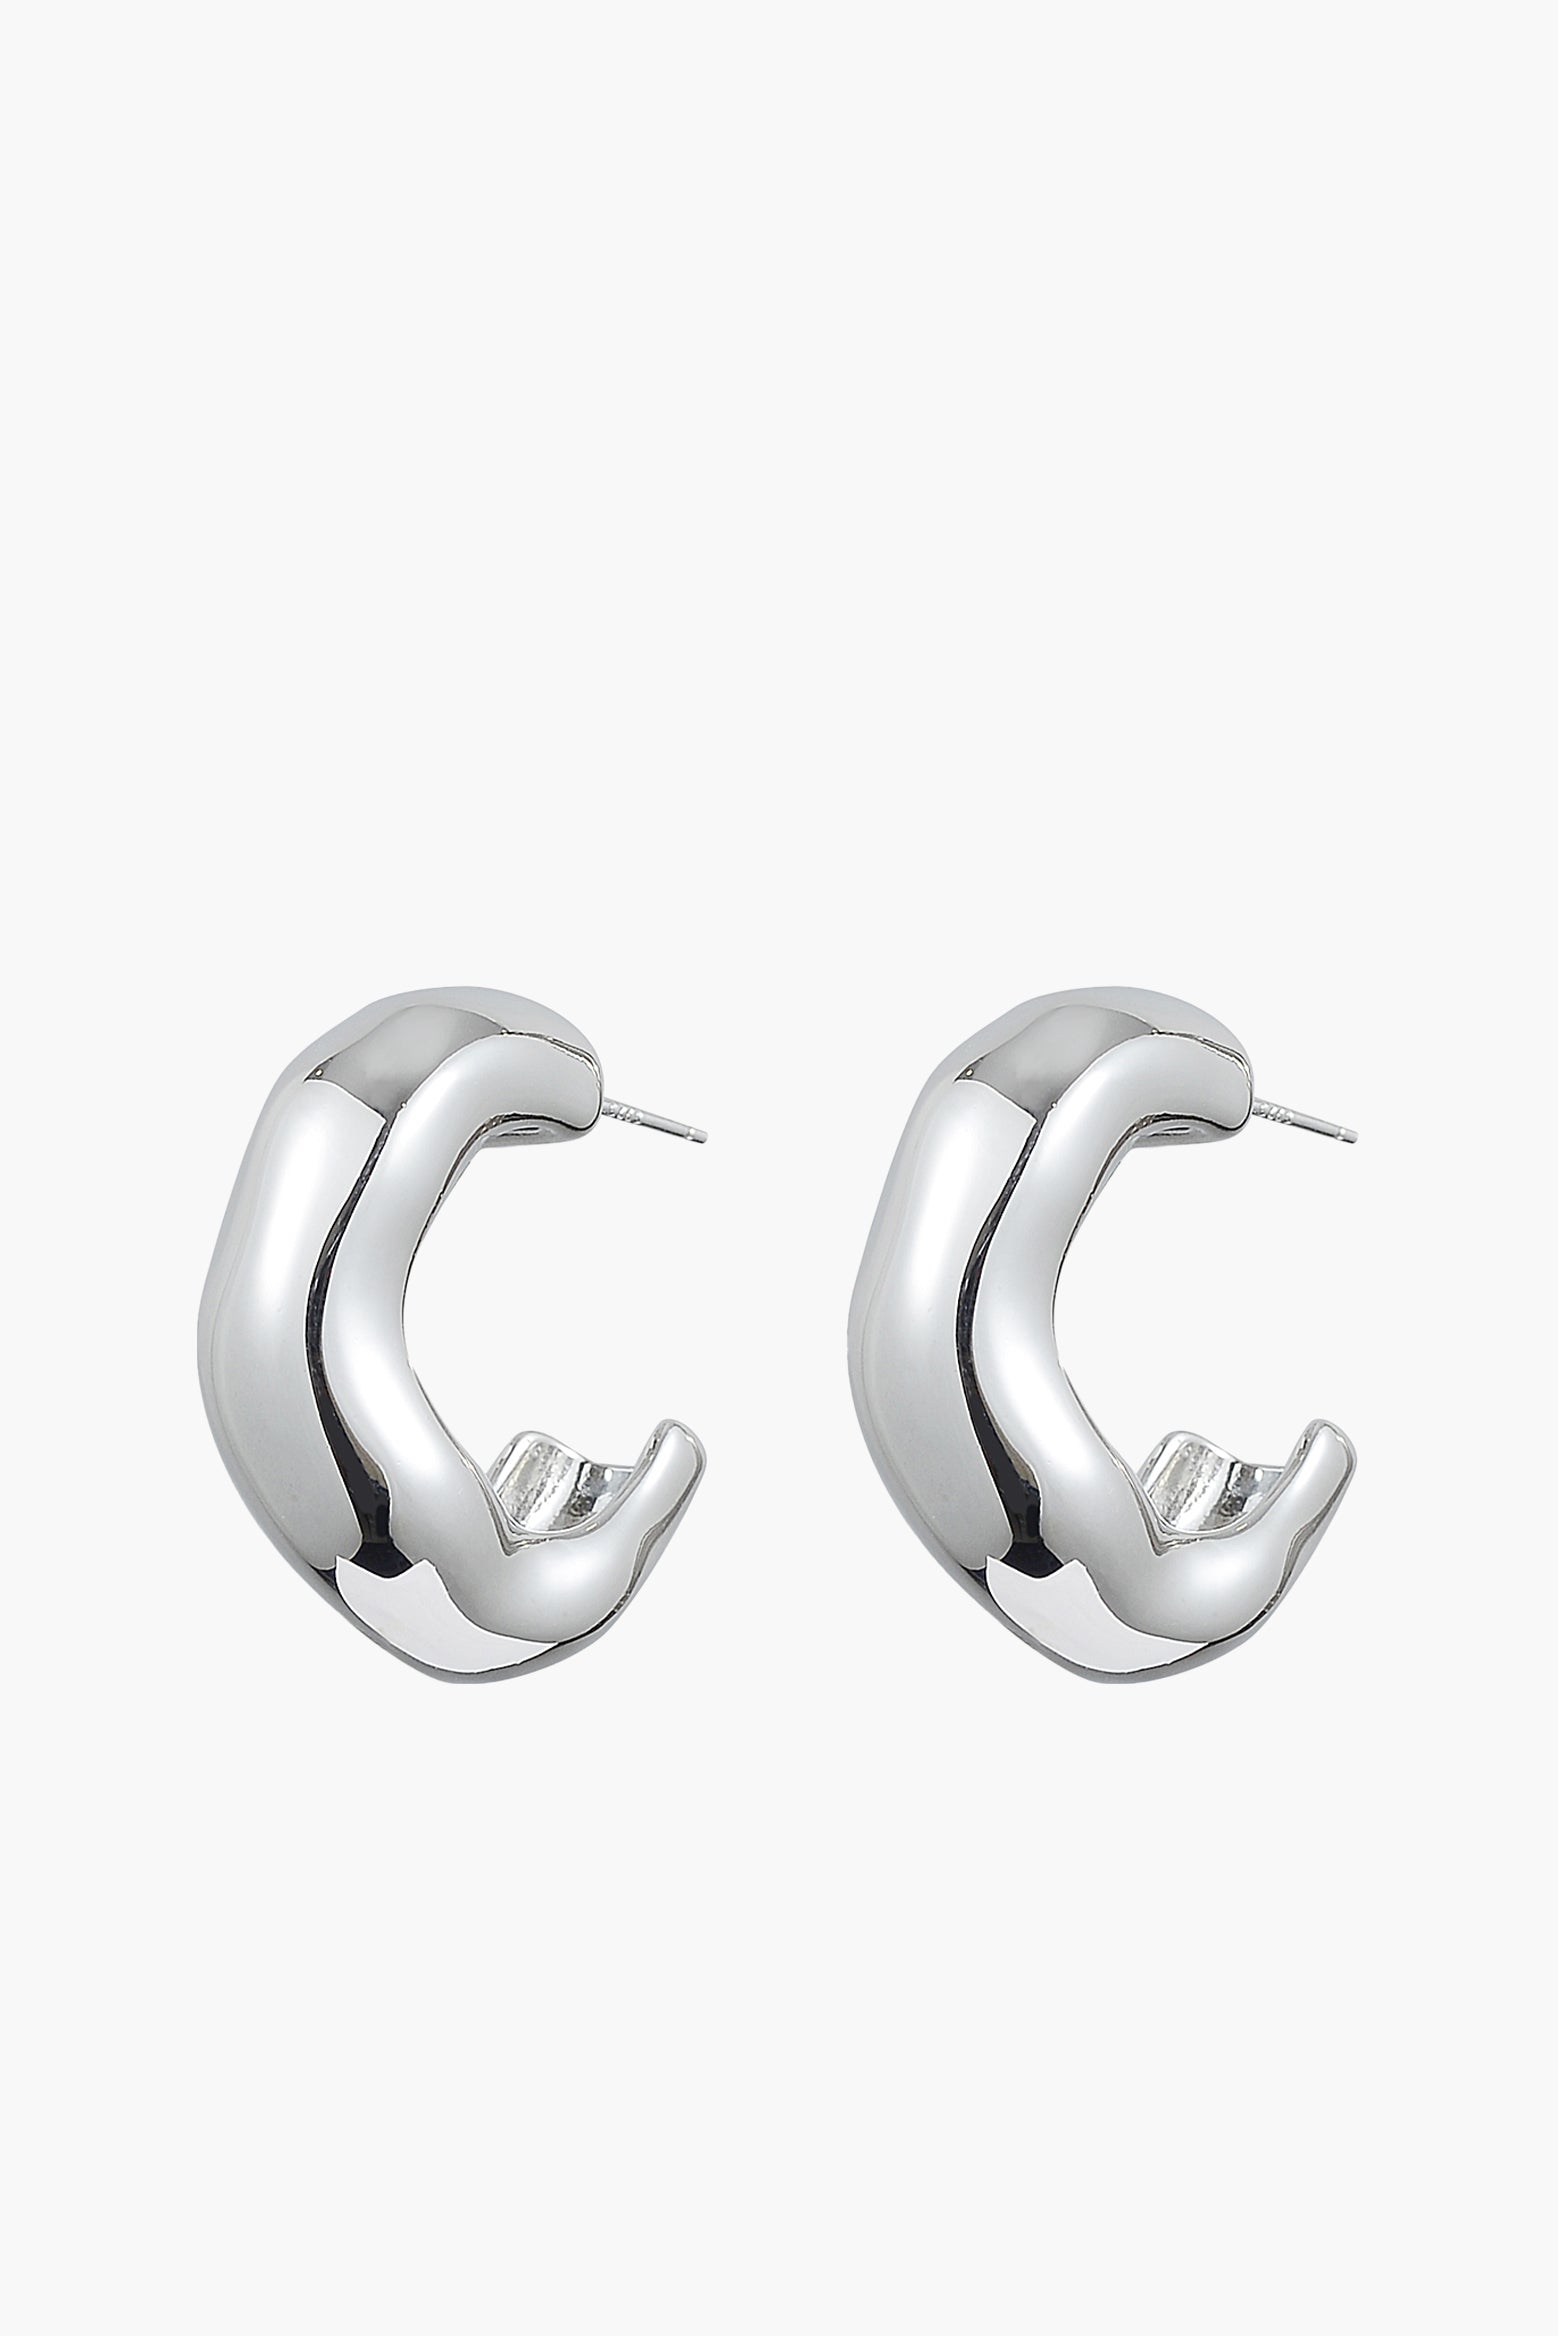 Anna Rossi Chunky Wave Hoop in Gunmetal available at The New Trend Australia.